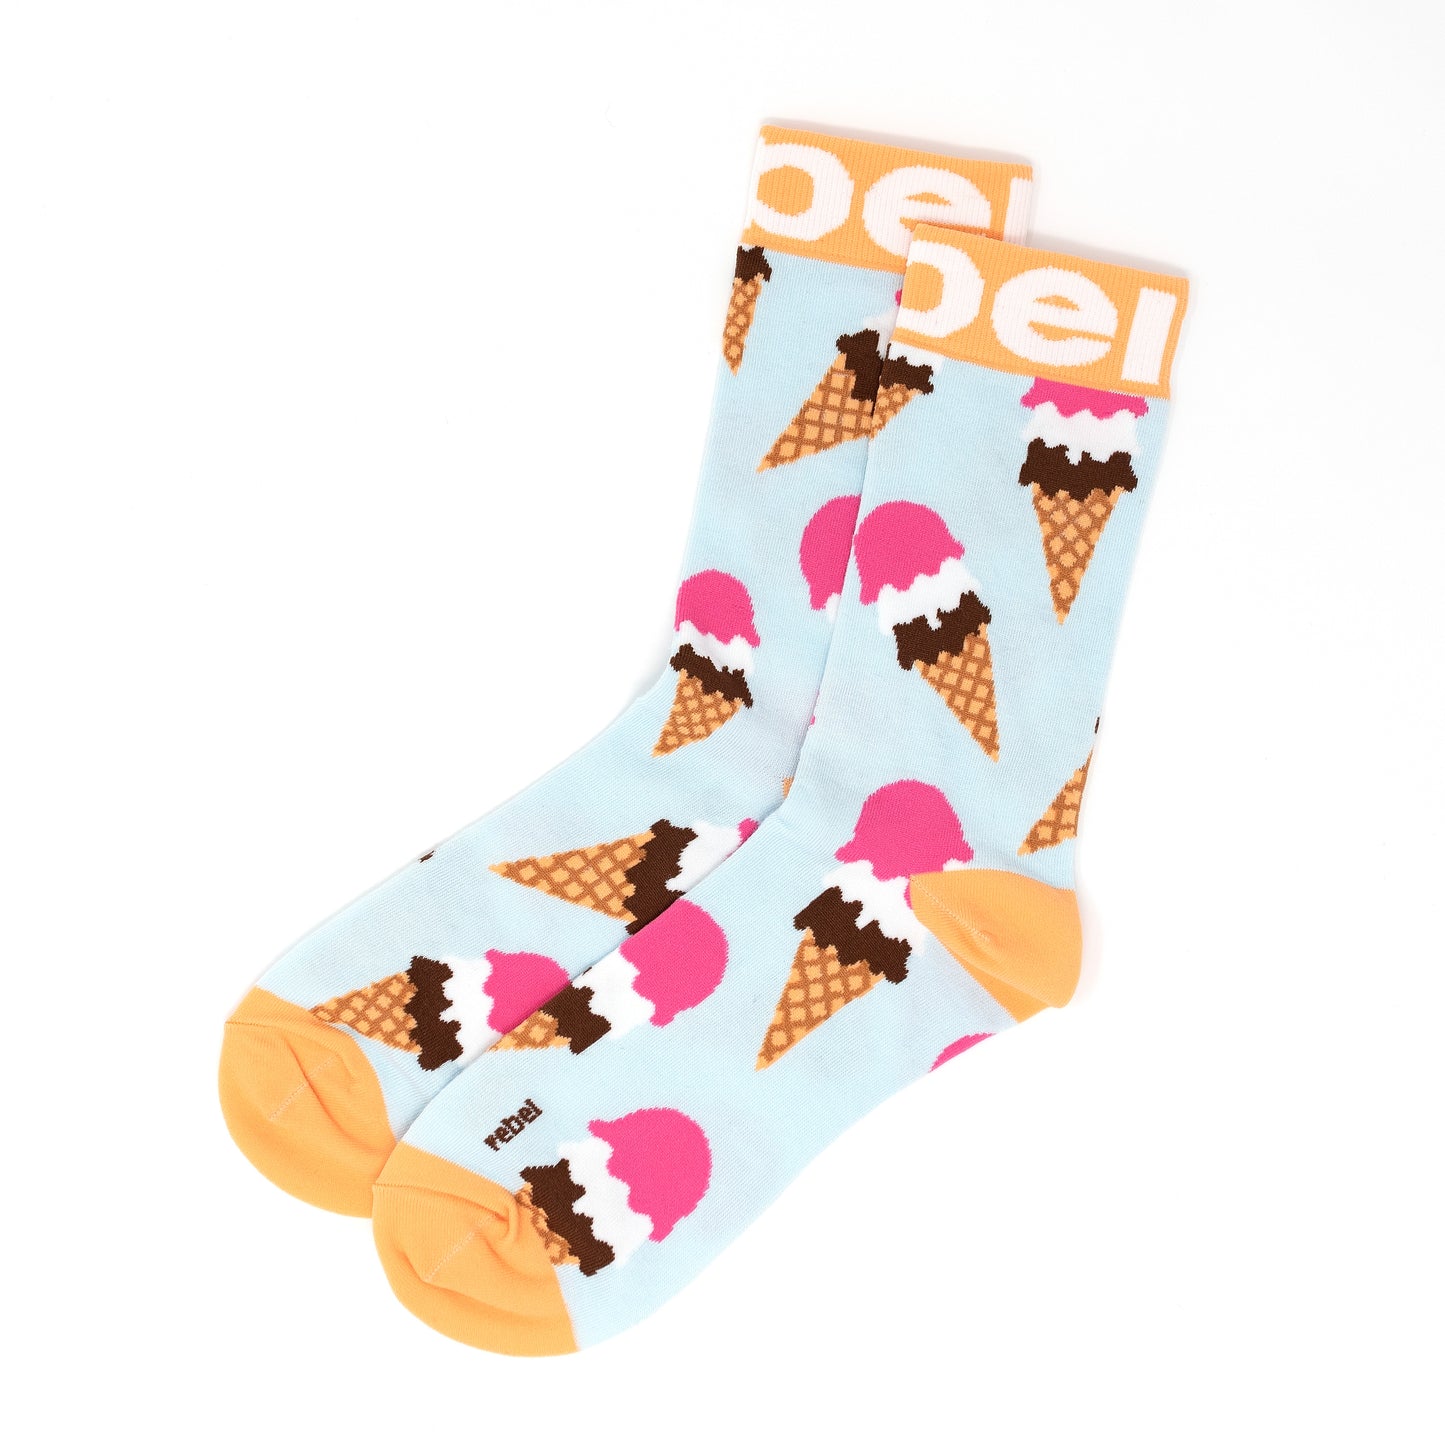 Our Funky Ice Cream Socks are a perfect gift for ice cream lovers or a great way to show off your personality and style.